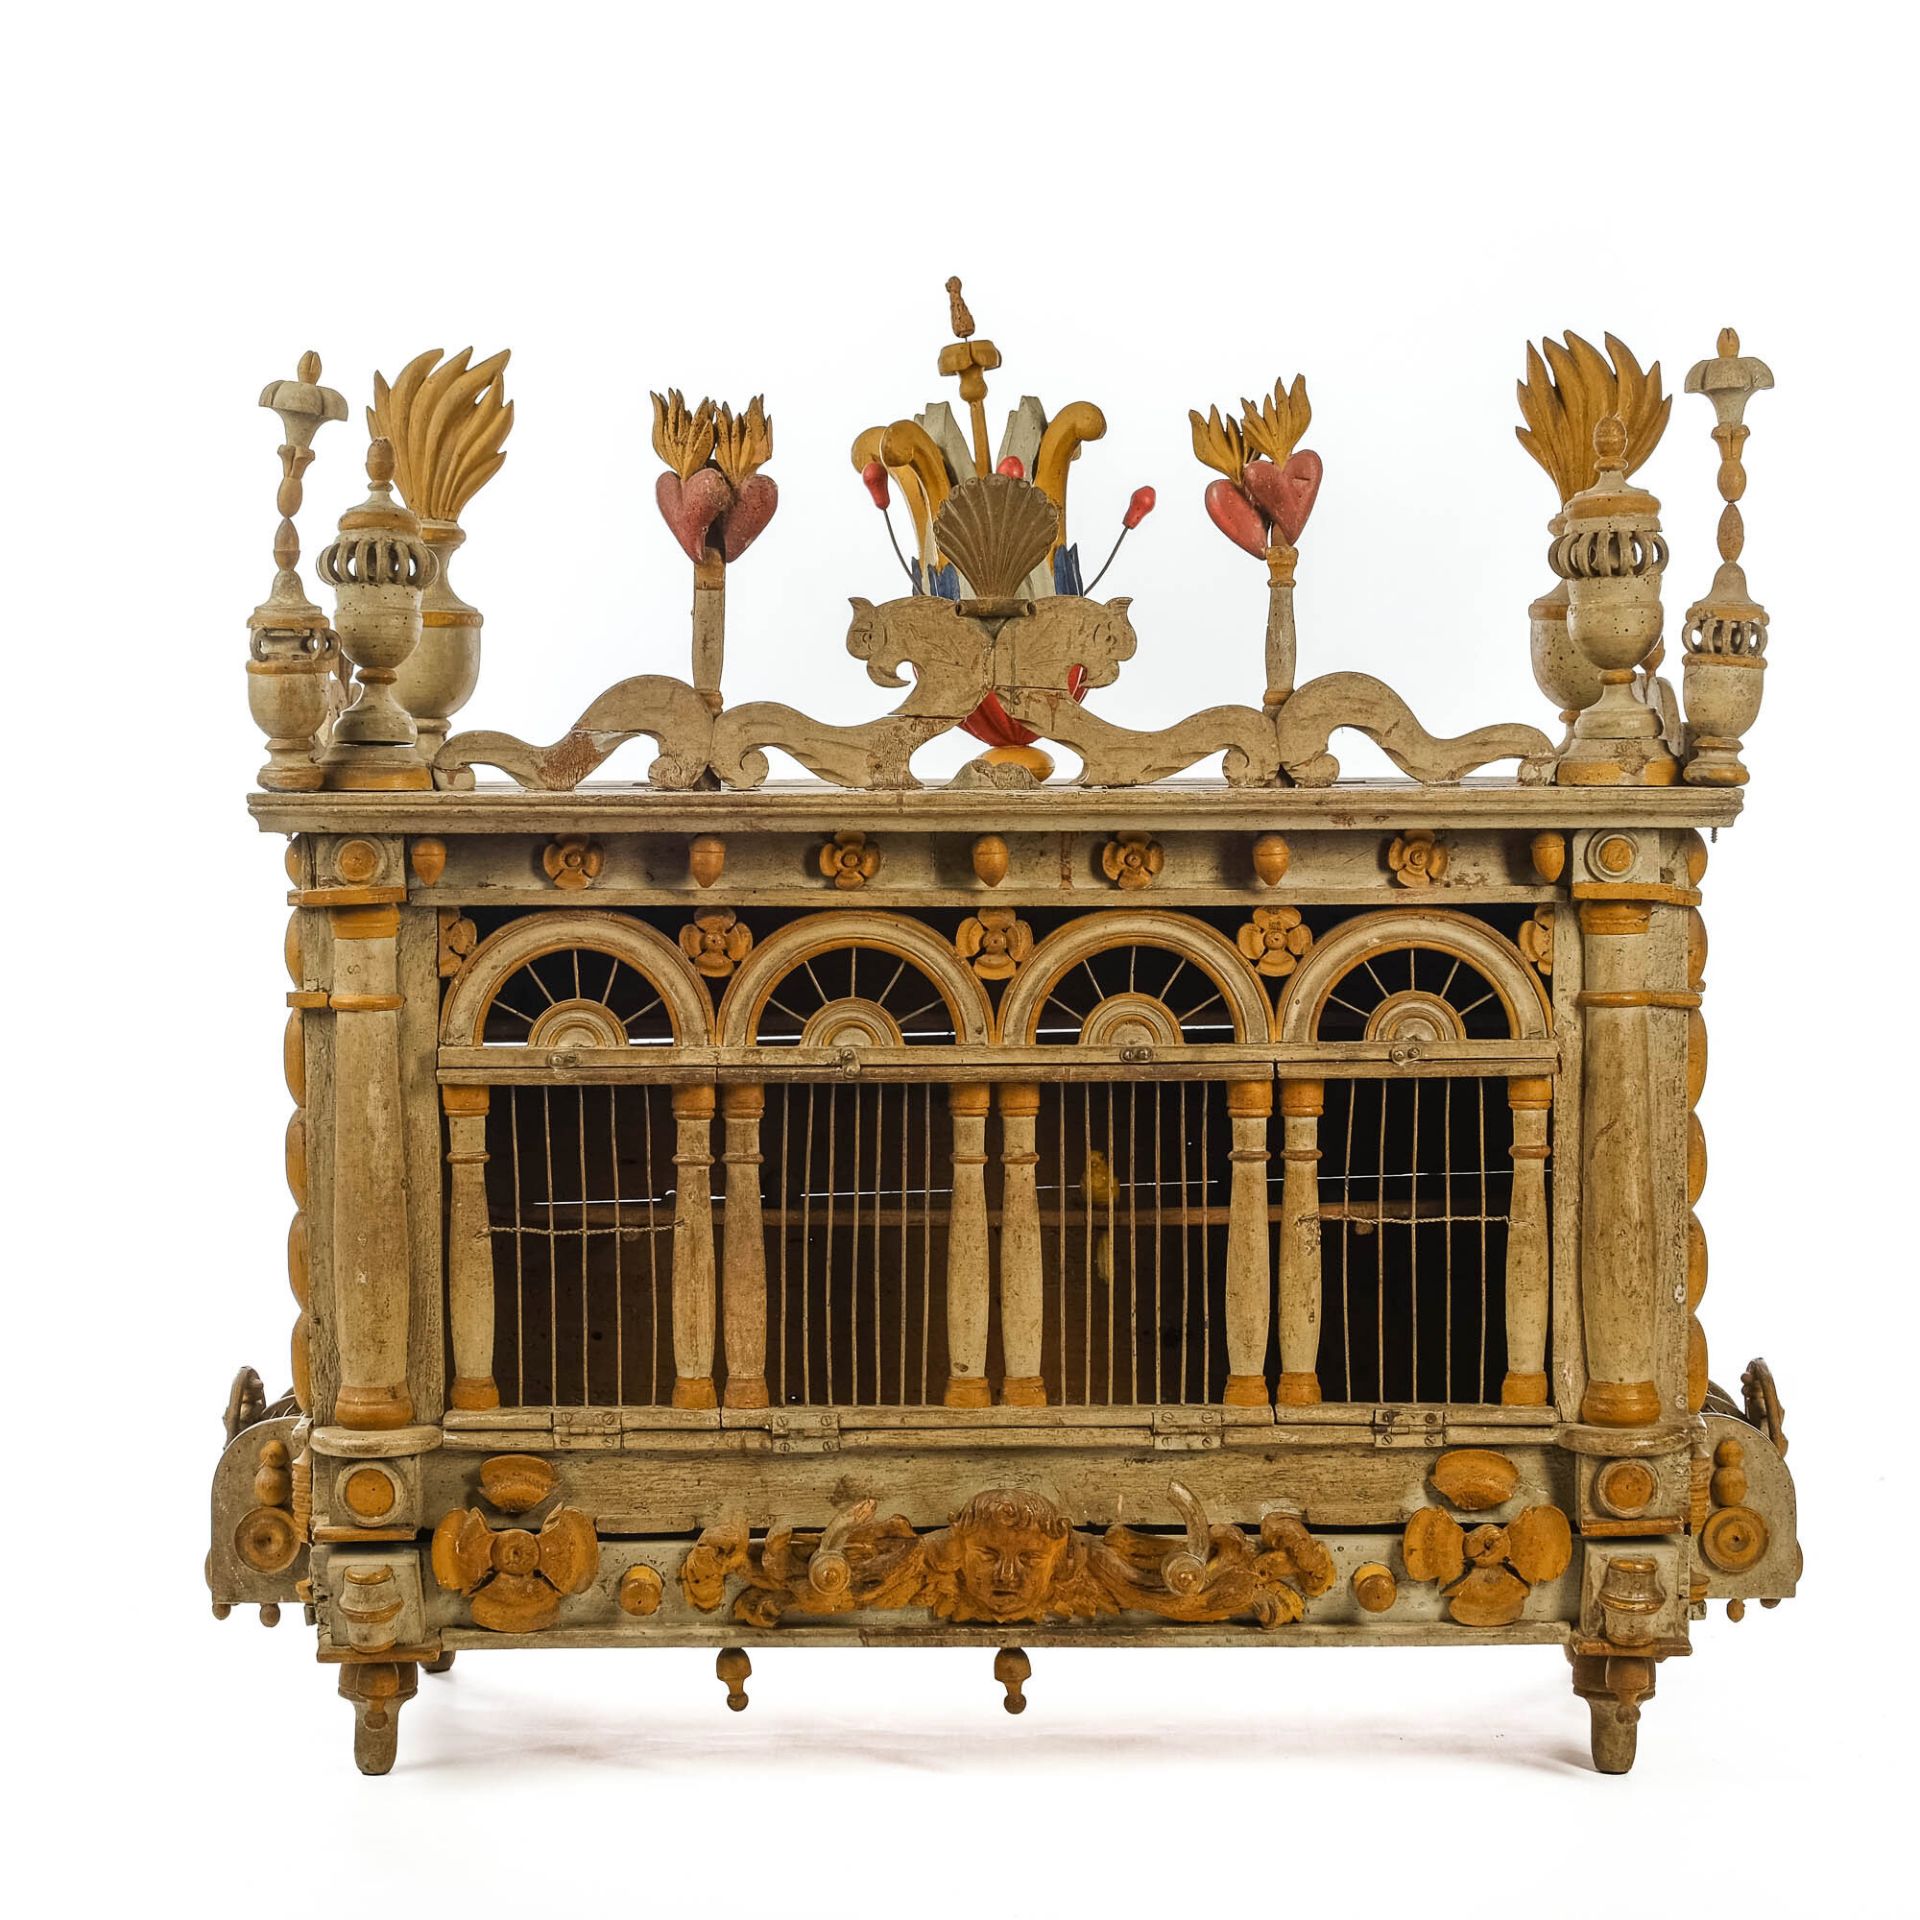 A large painted wooden birdcage, 18/19th C. - Image 5 of 8